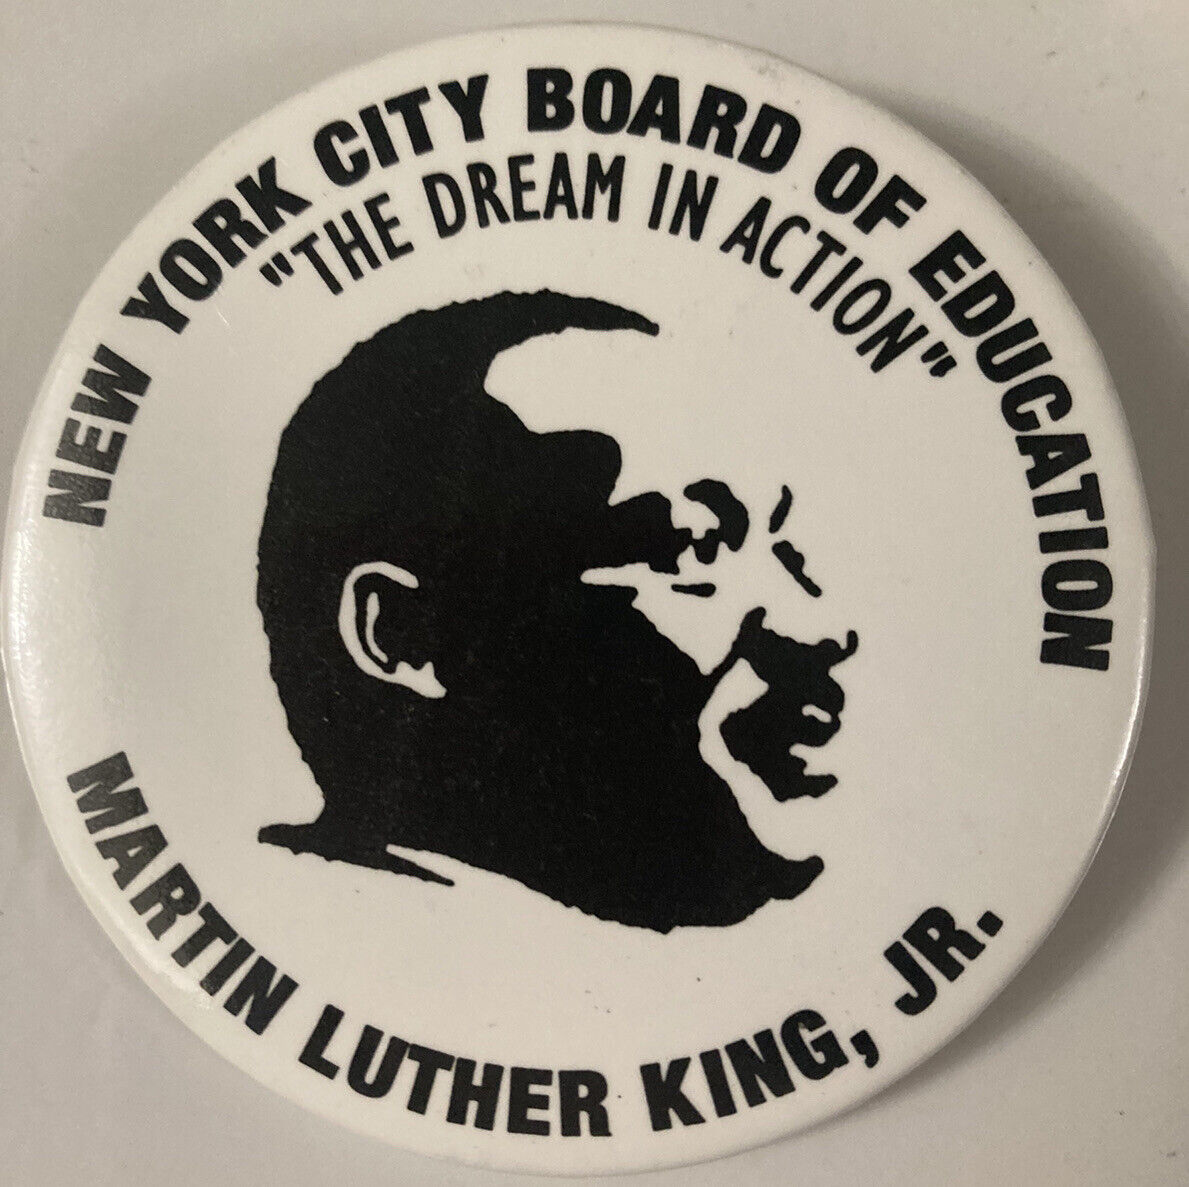 Martin Luther King, Jr. MLK 1994 New York City Board of Education 3” Pinback